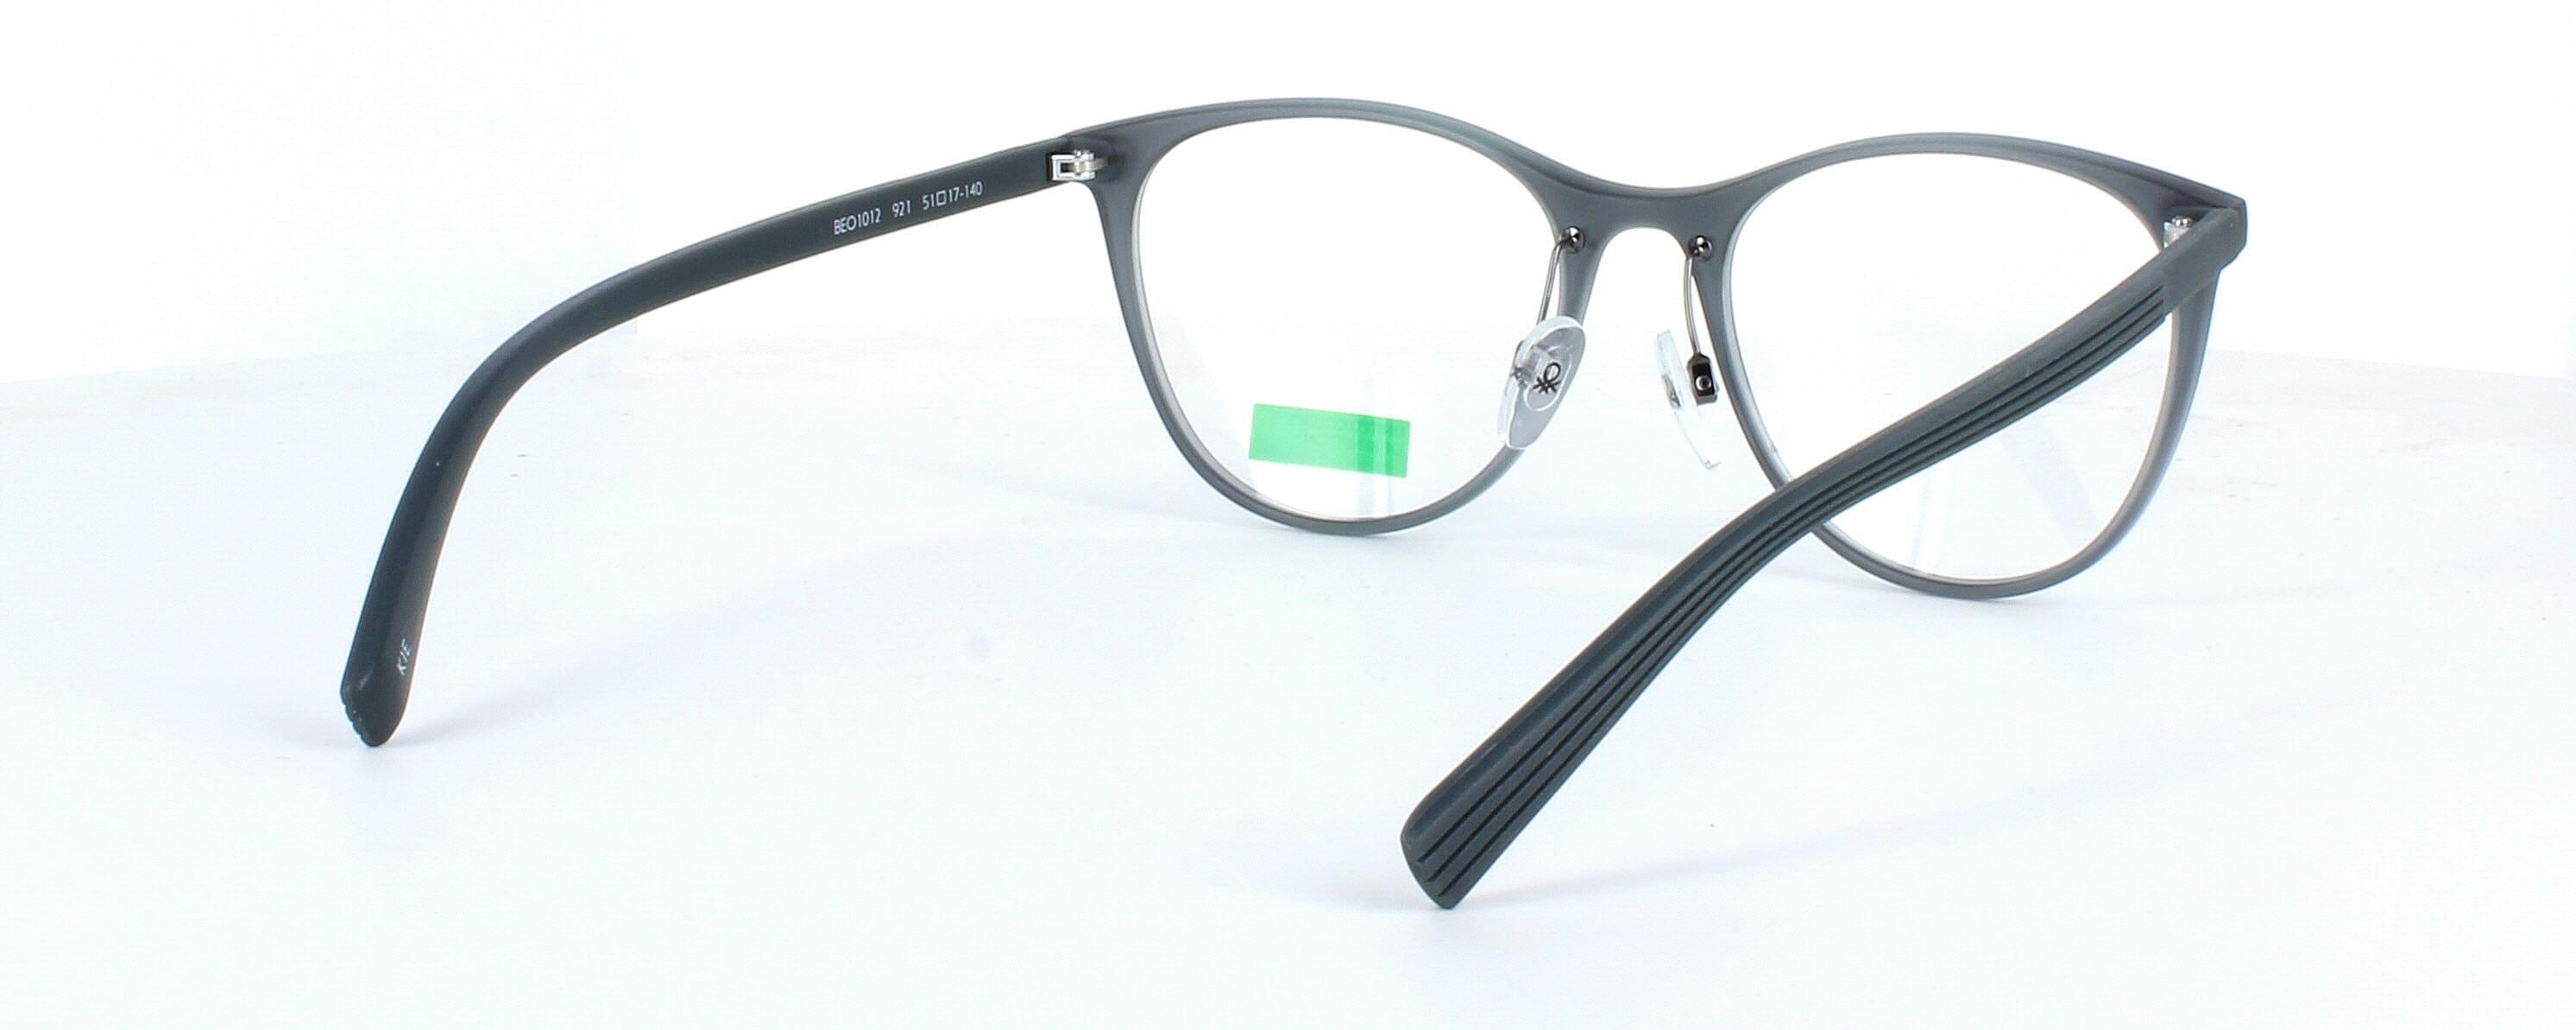 Benetton BEO1013 112 - Women's matt crystal grey round shaped TR90 lightweight plastic glasses frame with grey arms - image view 5